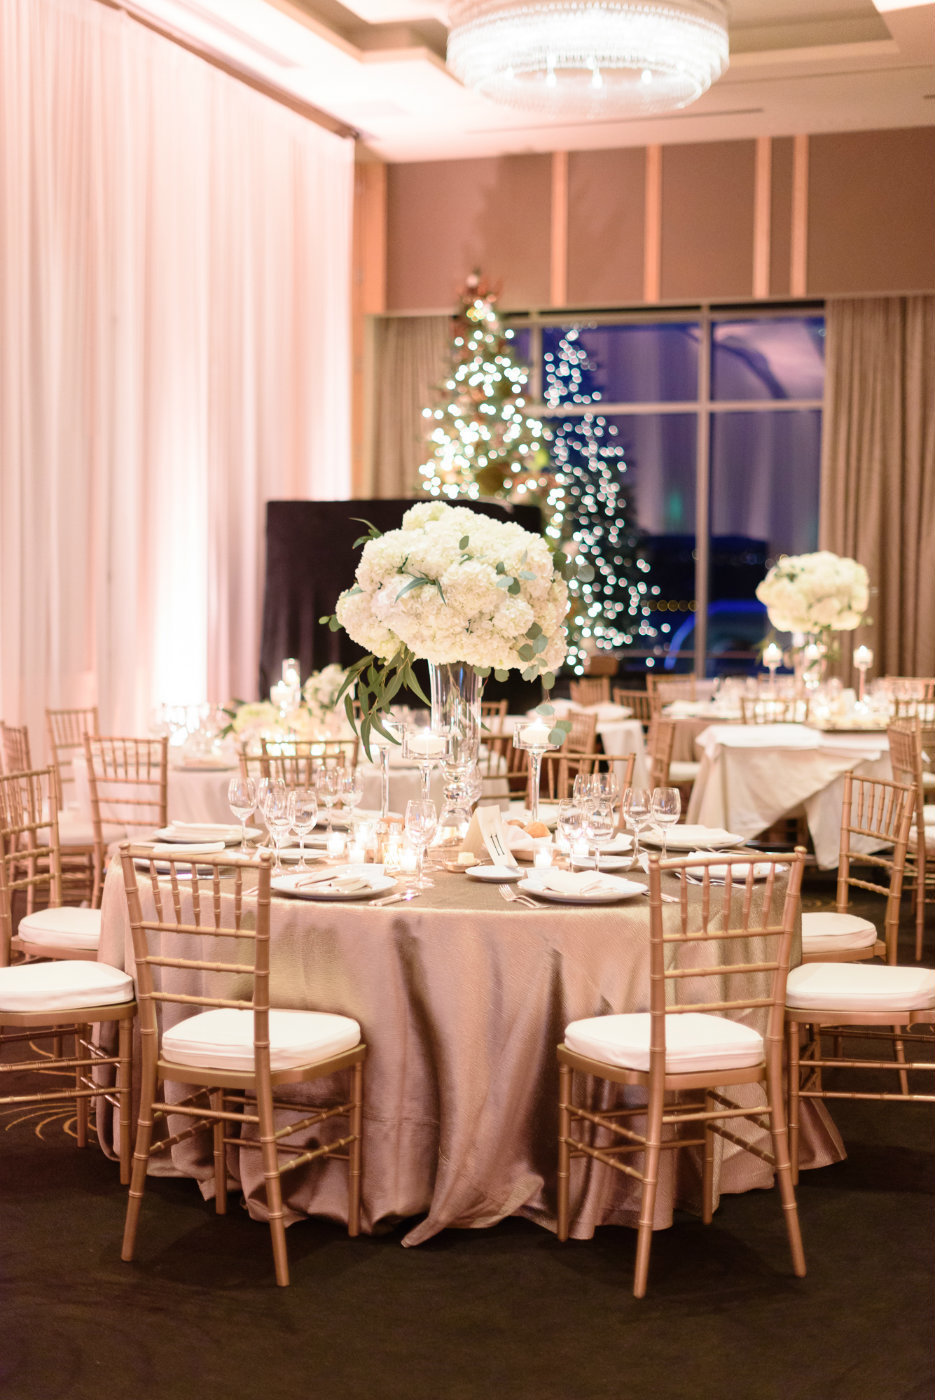 White floral, a bit of shimmer and candlelight make for a lovely winter ballroom wedding at Four Seasons Hotel Seattle